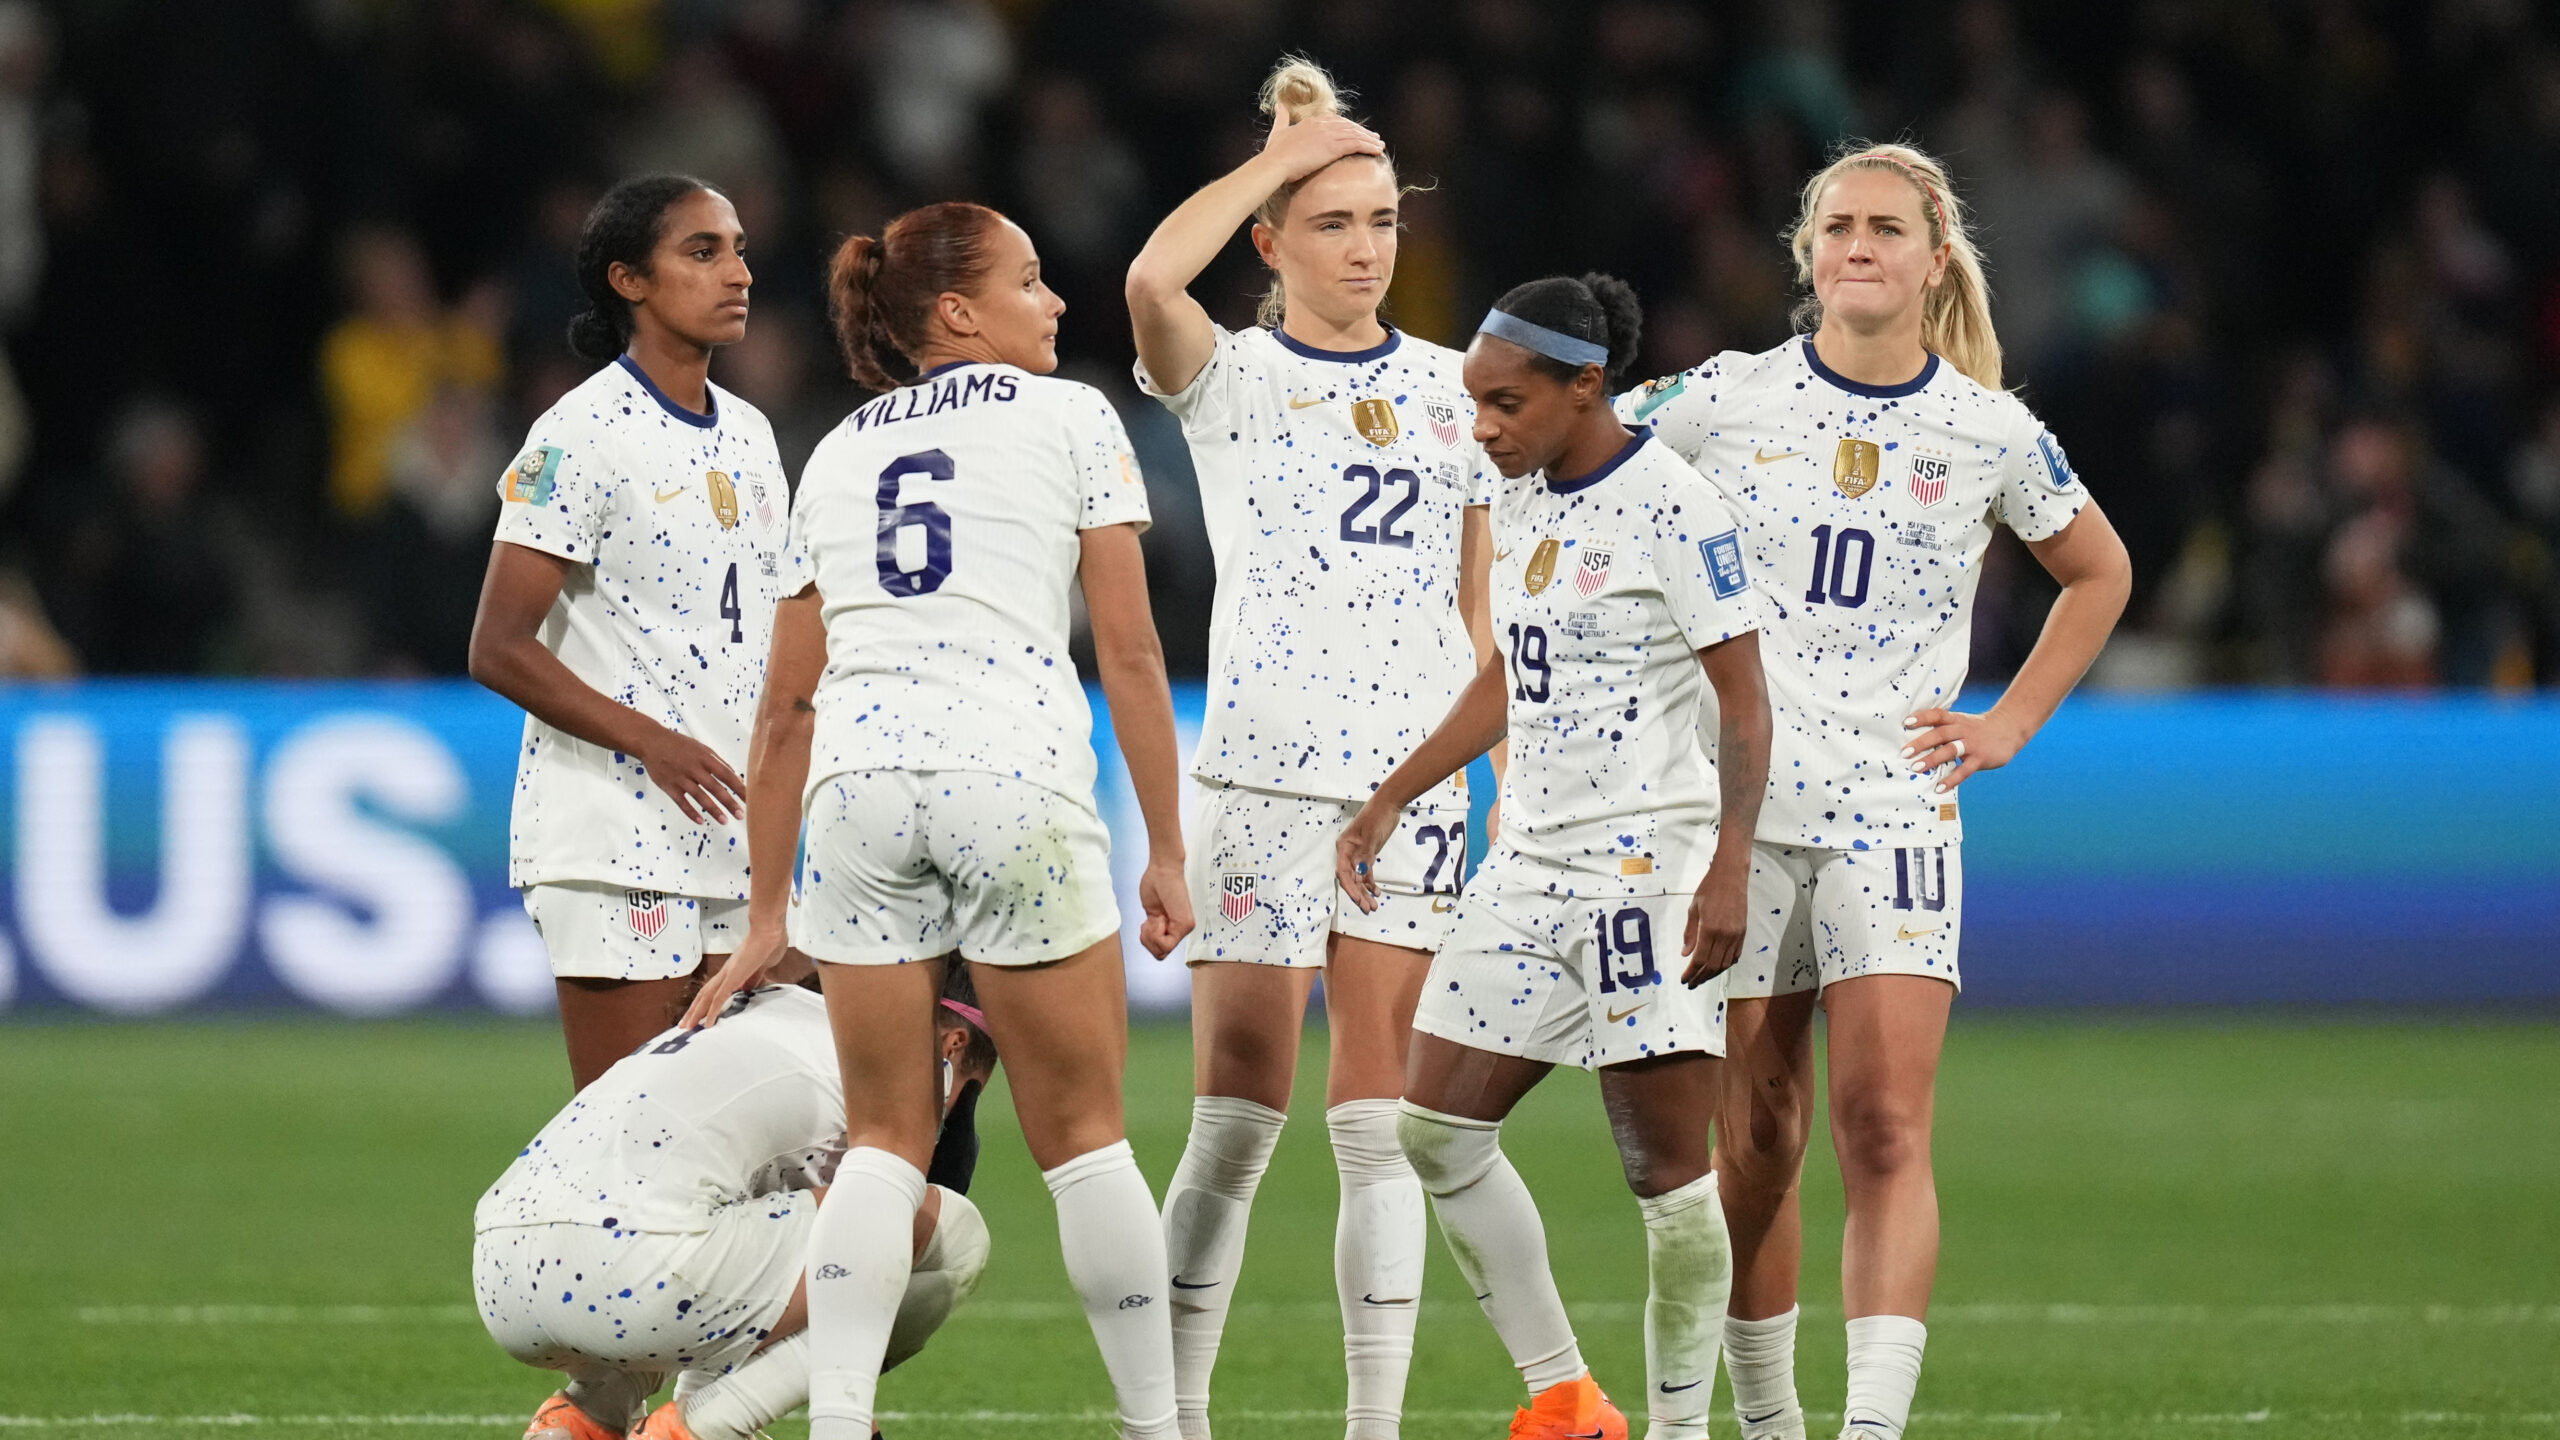 Where Does USA Fit in the Women's International Soccer Pecking Order